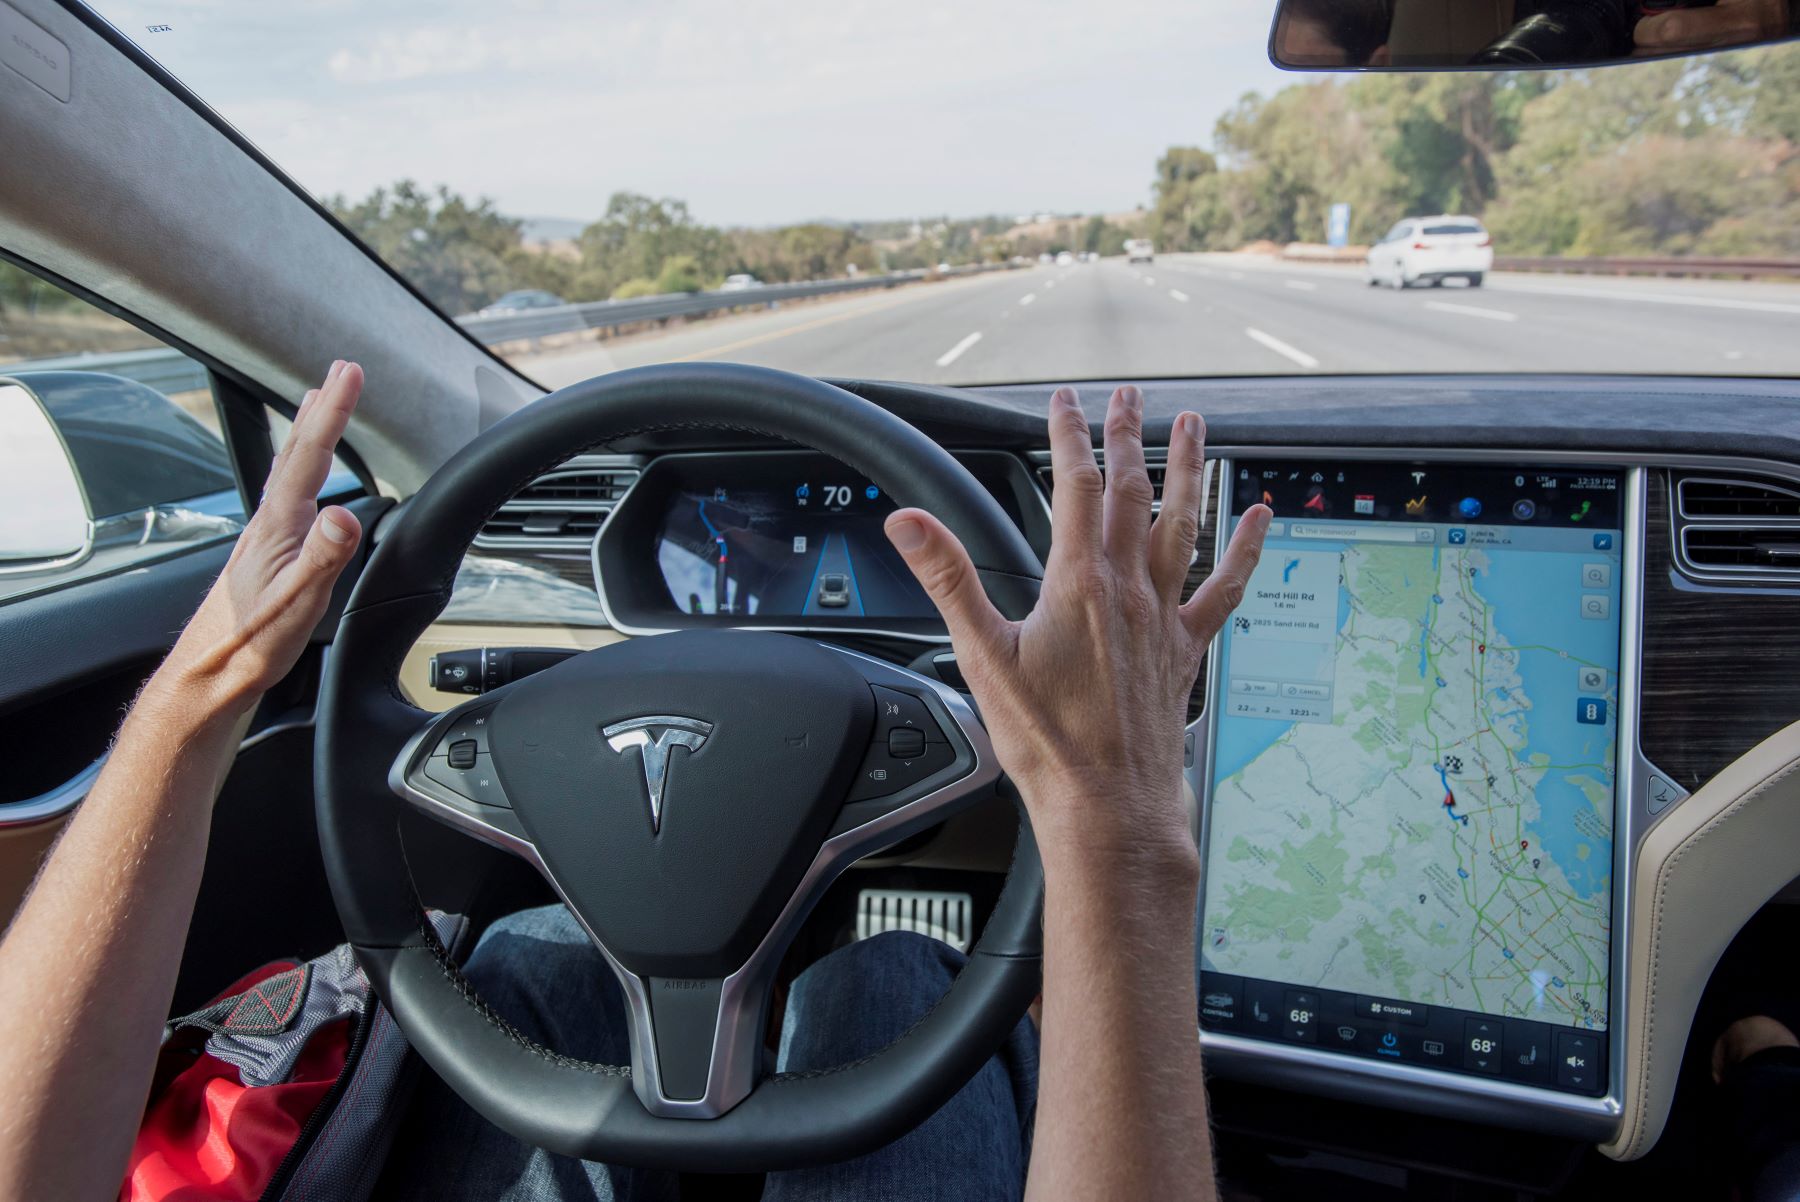 A Tesla self-driving/autonomous vehicle test touted by Elon Musk performed in Palo Alto, California in 2015